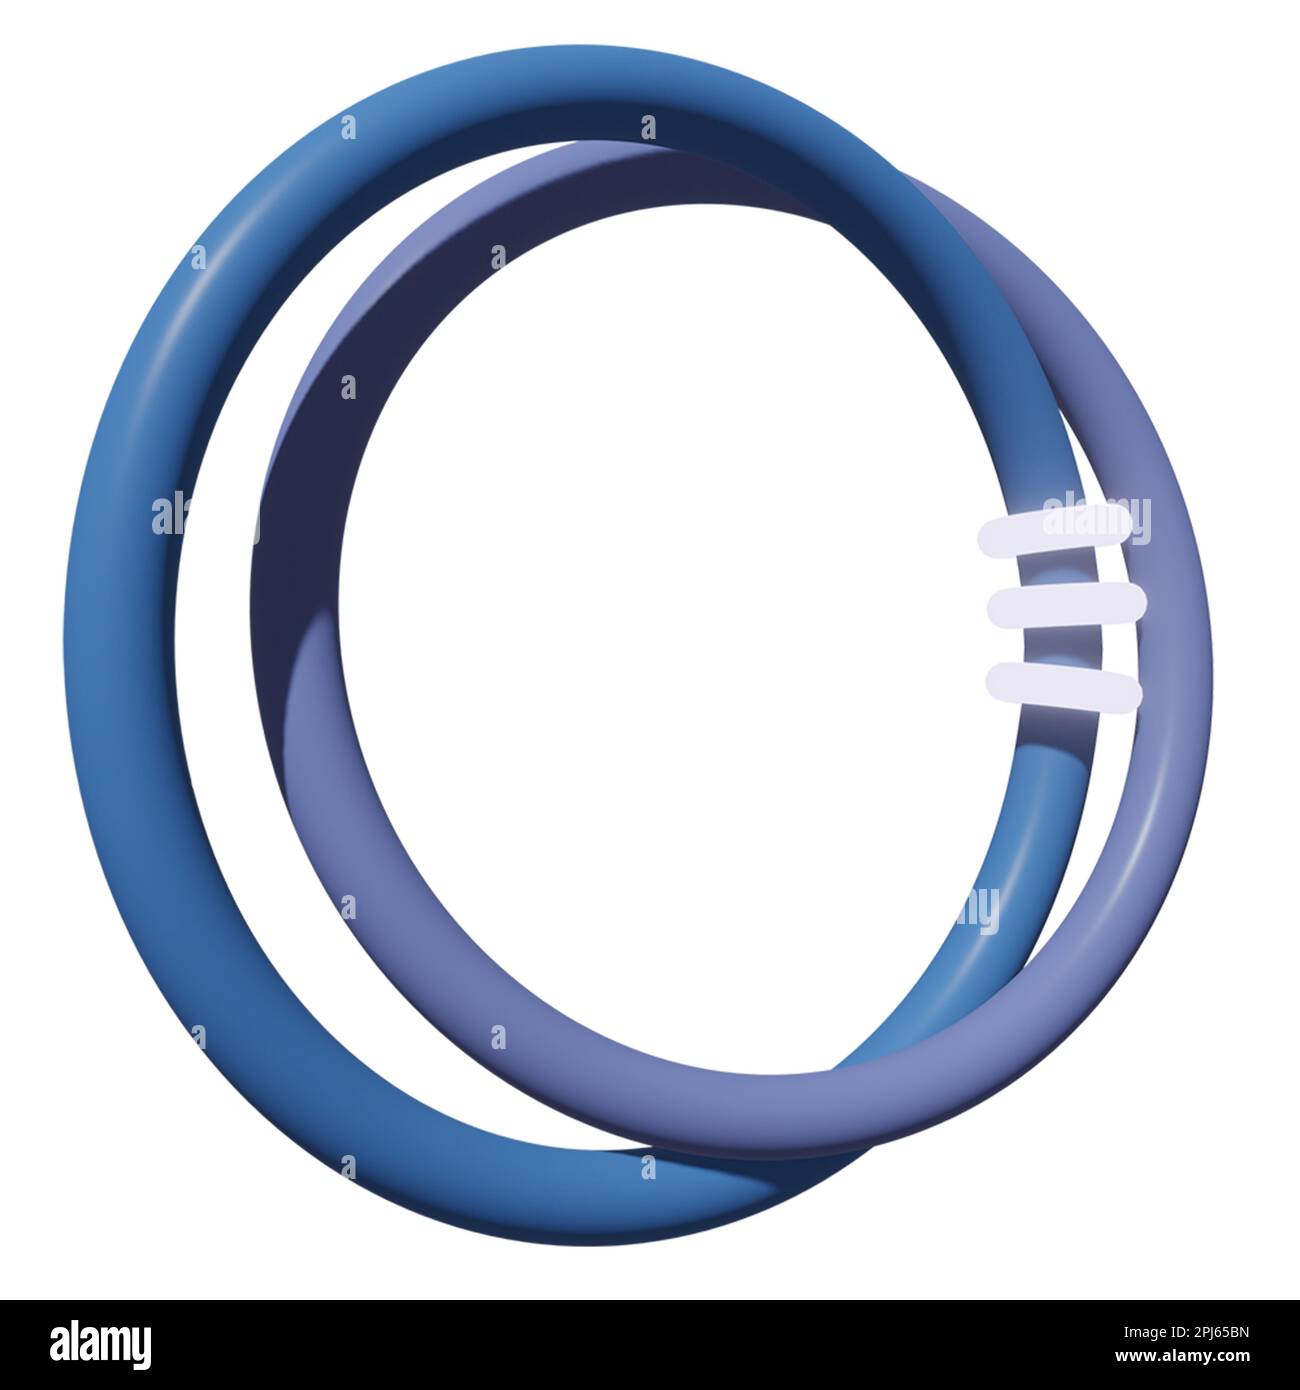 A stock photo of two interlocking blue rings on a white background with various clippings scattered around them Stock Photo